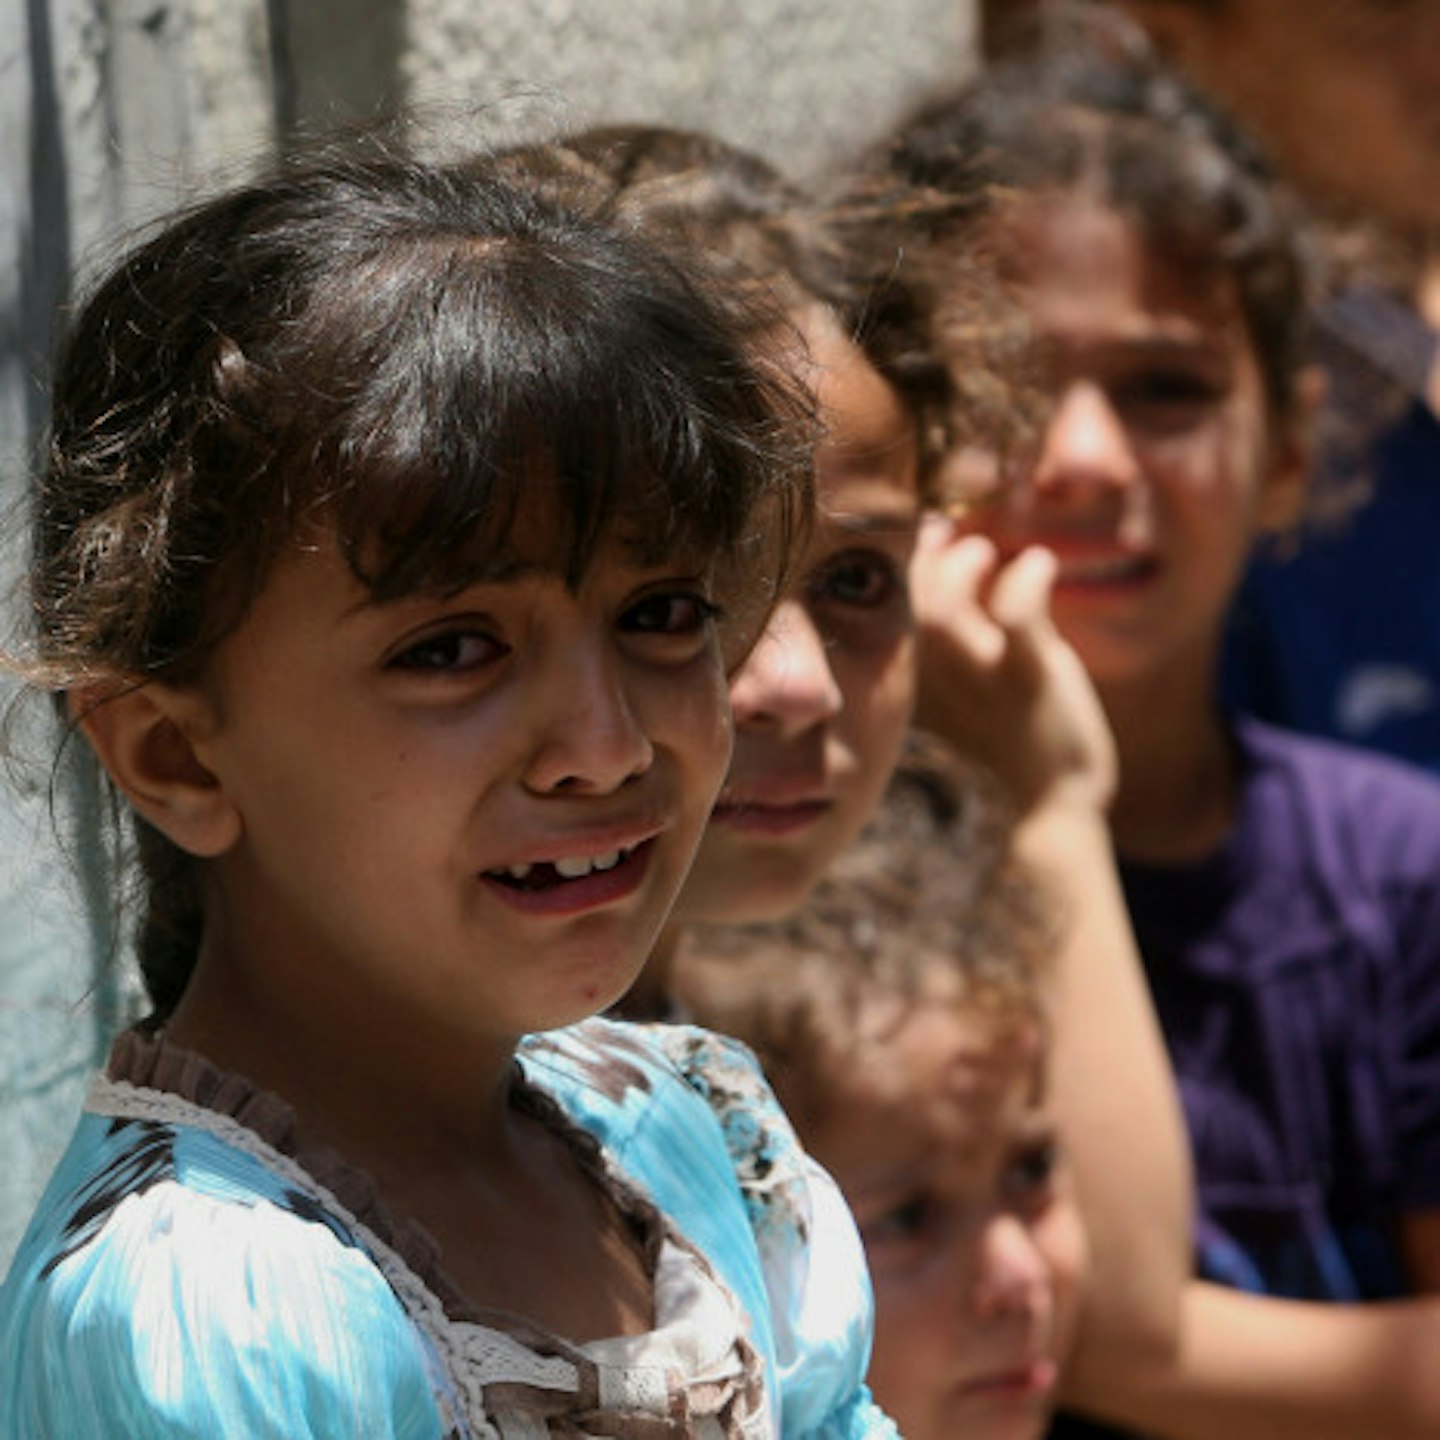 Hundreds of children have been killed in the Israel-Gaza conflict